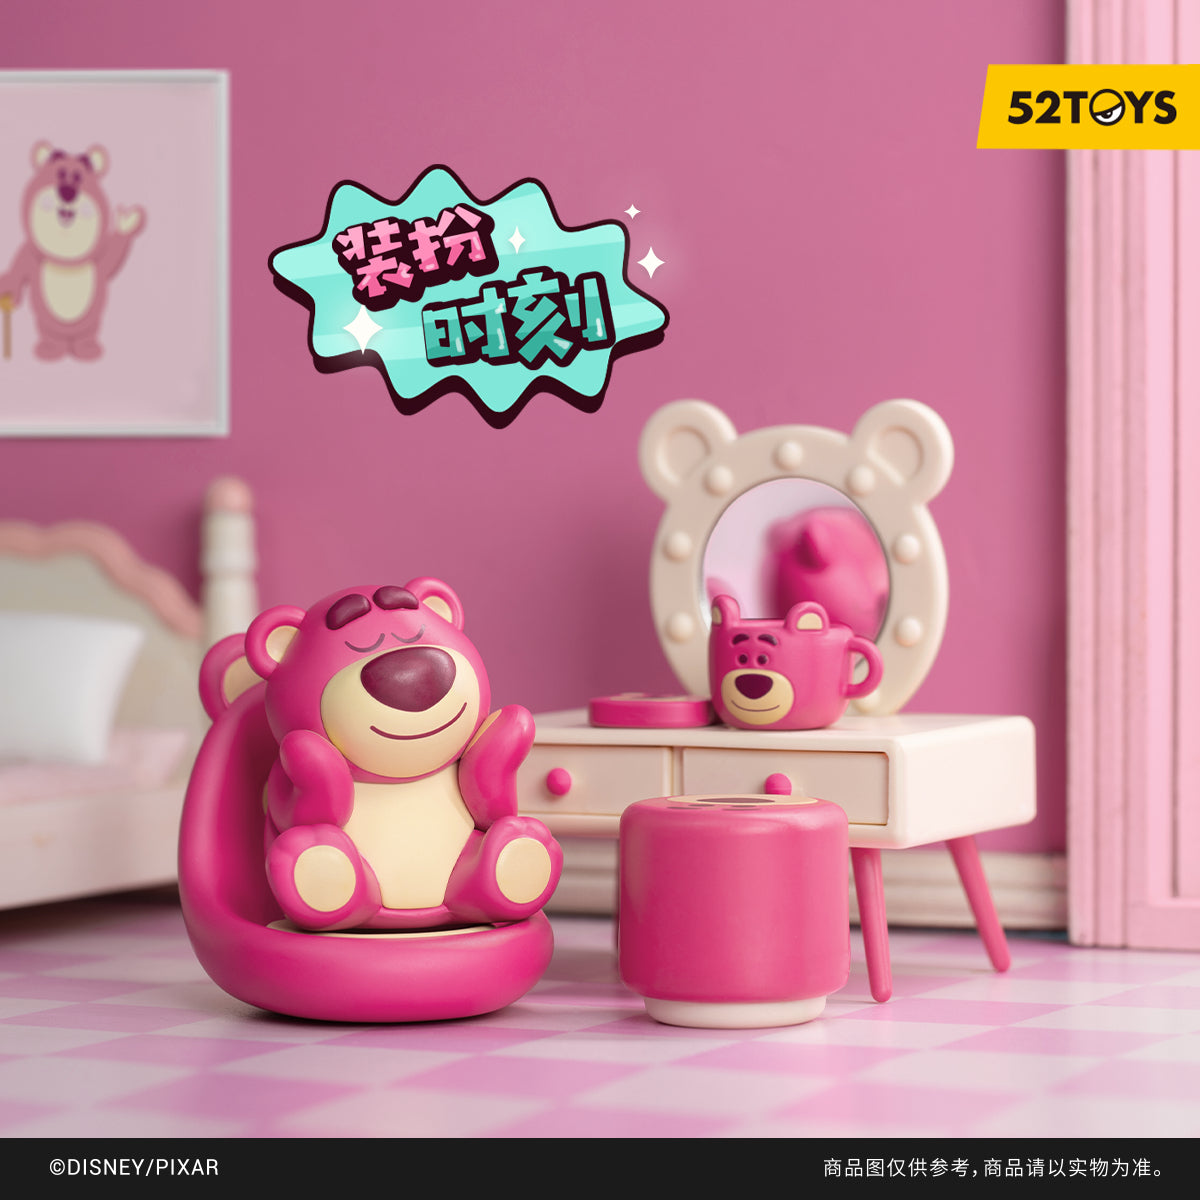 [52TOYS] TOYSTORY - LOTSO's Room series blind box